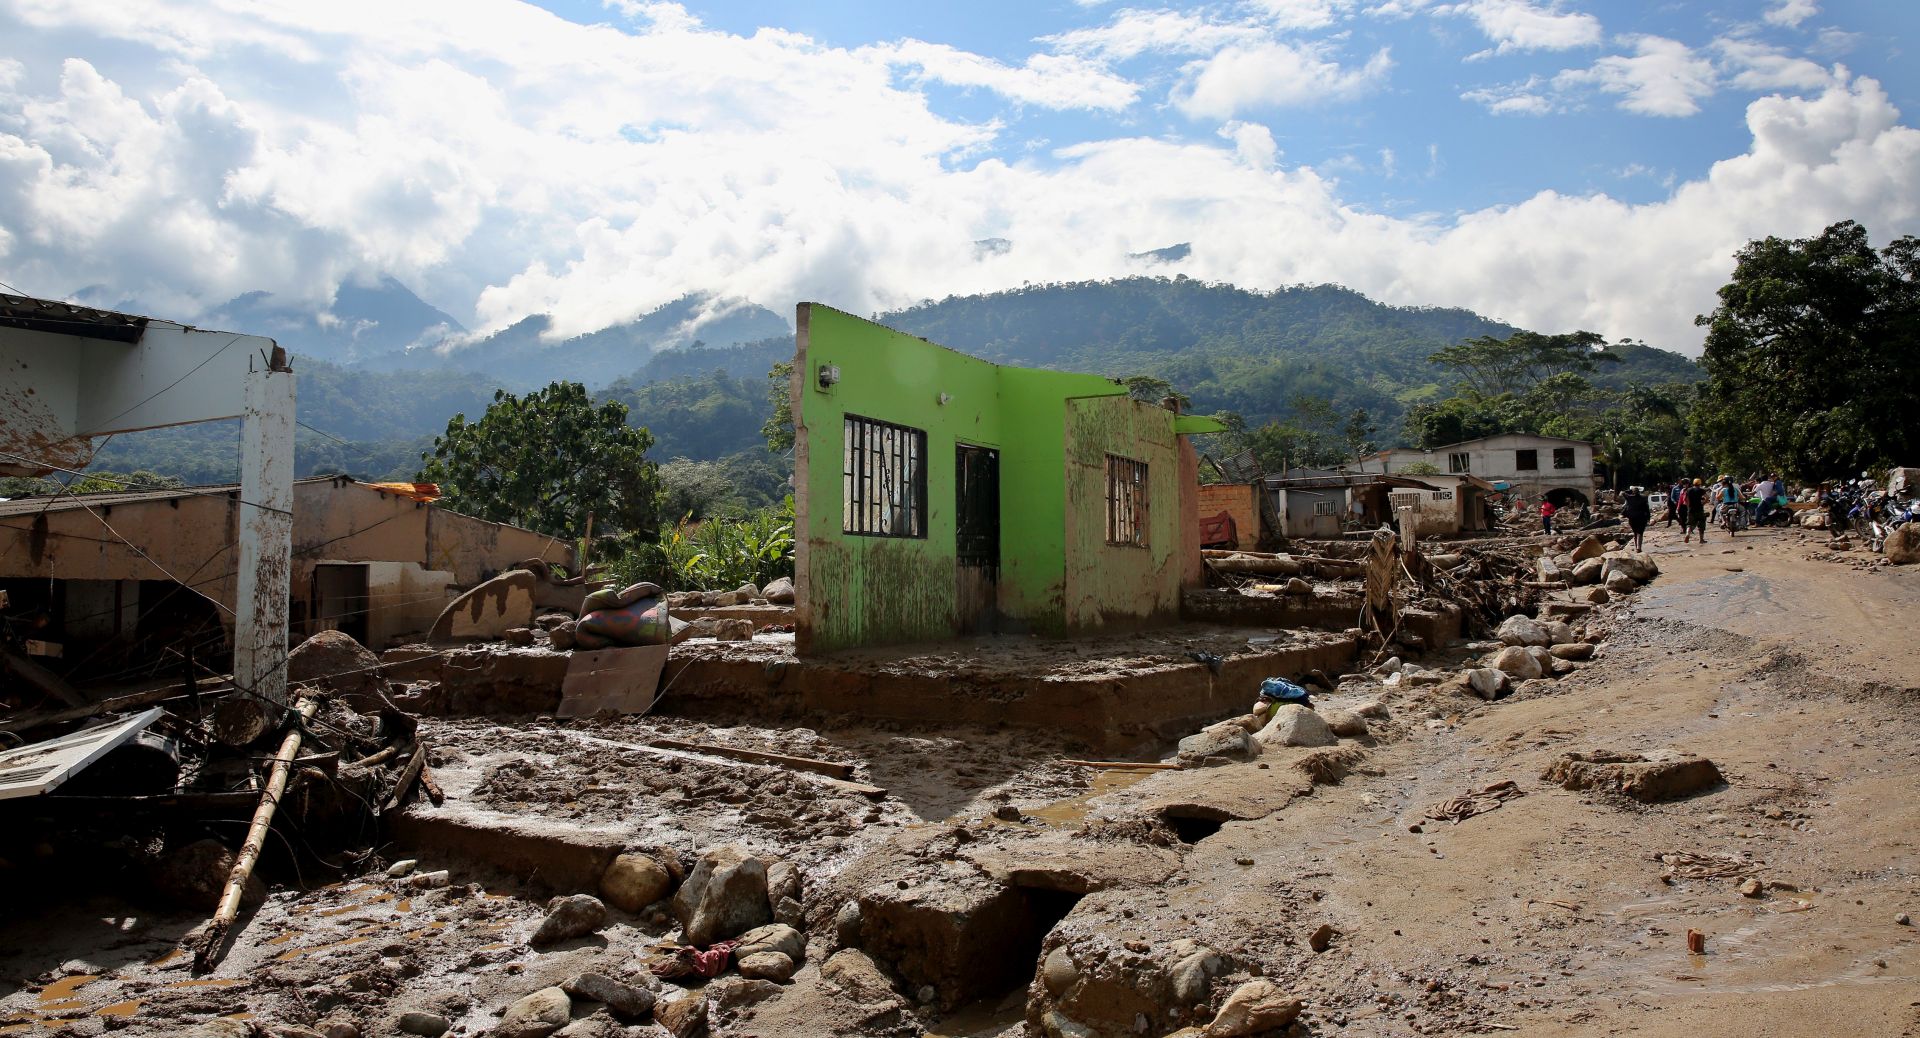 epa05885190 View of destroyed homes at San Miguel neighborhood, affected by a mudslide in Mocoa, Colombia, 02 April 2017. Rescuers continue up efforts Sunday to find survivors of the mudslides that killed at least 234 people and injured 202 others in Mocoa, the capital of the southern Colombian province of Putumayo, officials said.  EPA/Leonardo Munoz